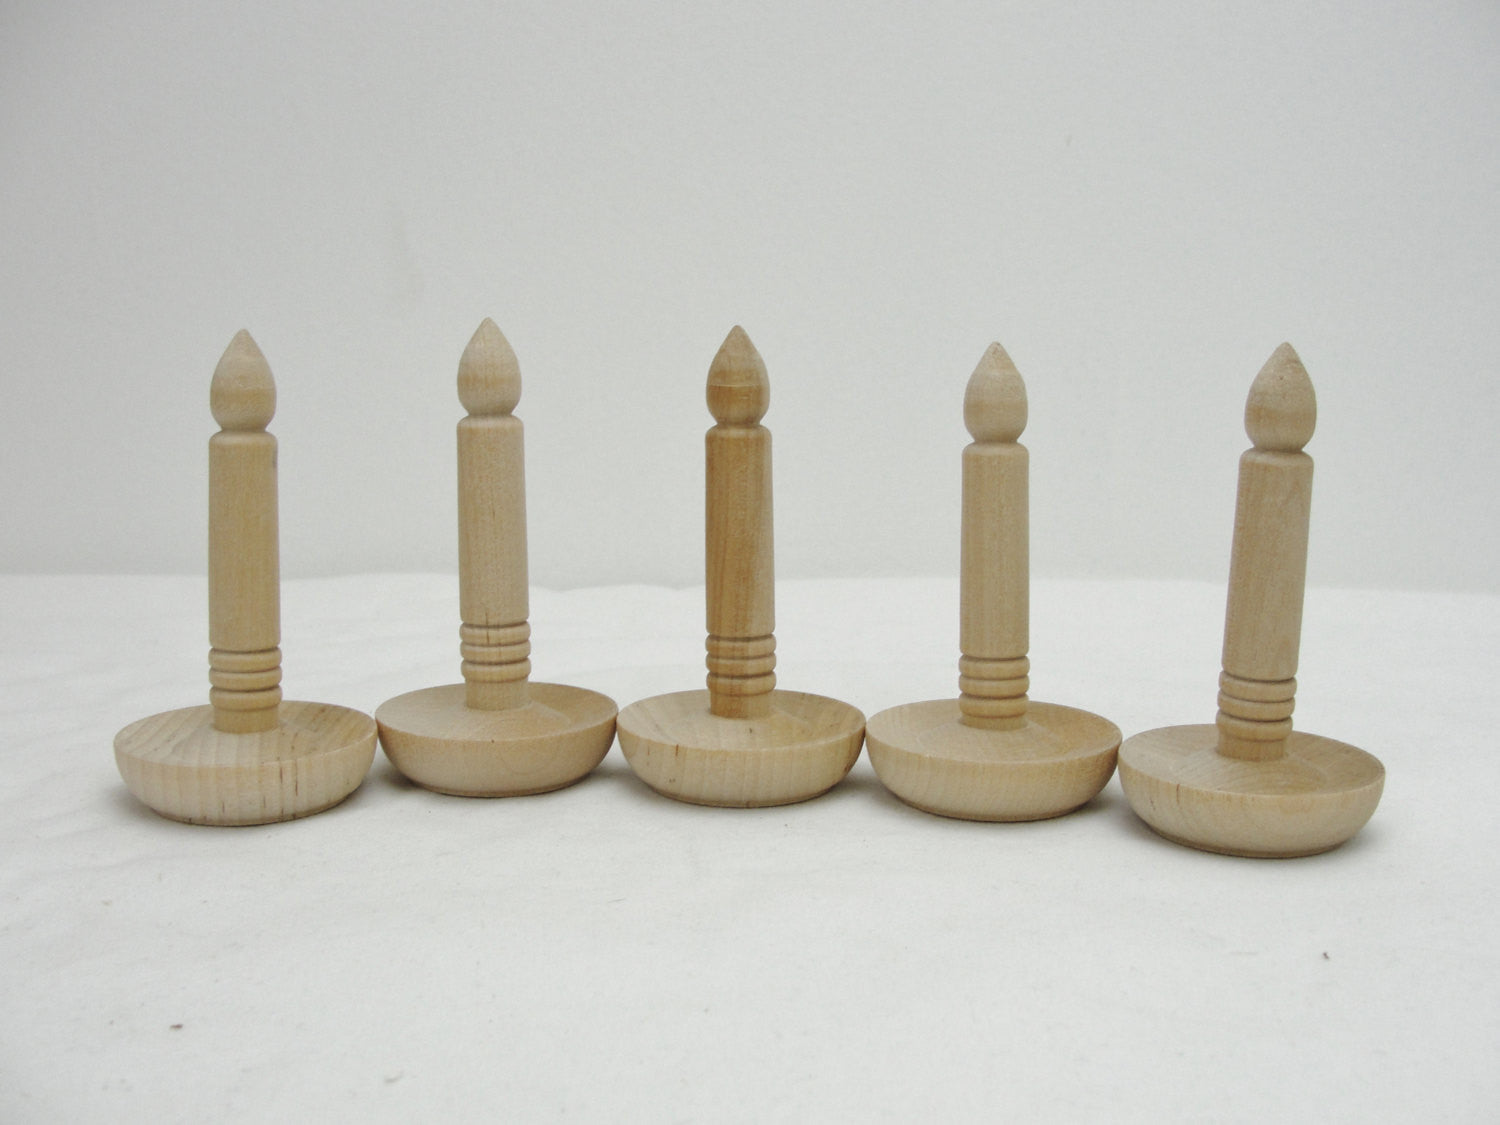 Wooden candle Christmas ornament set of 5 - Wood parts - Craft Supply House